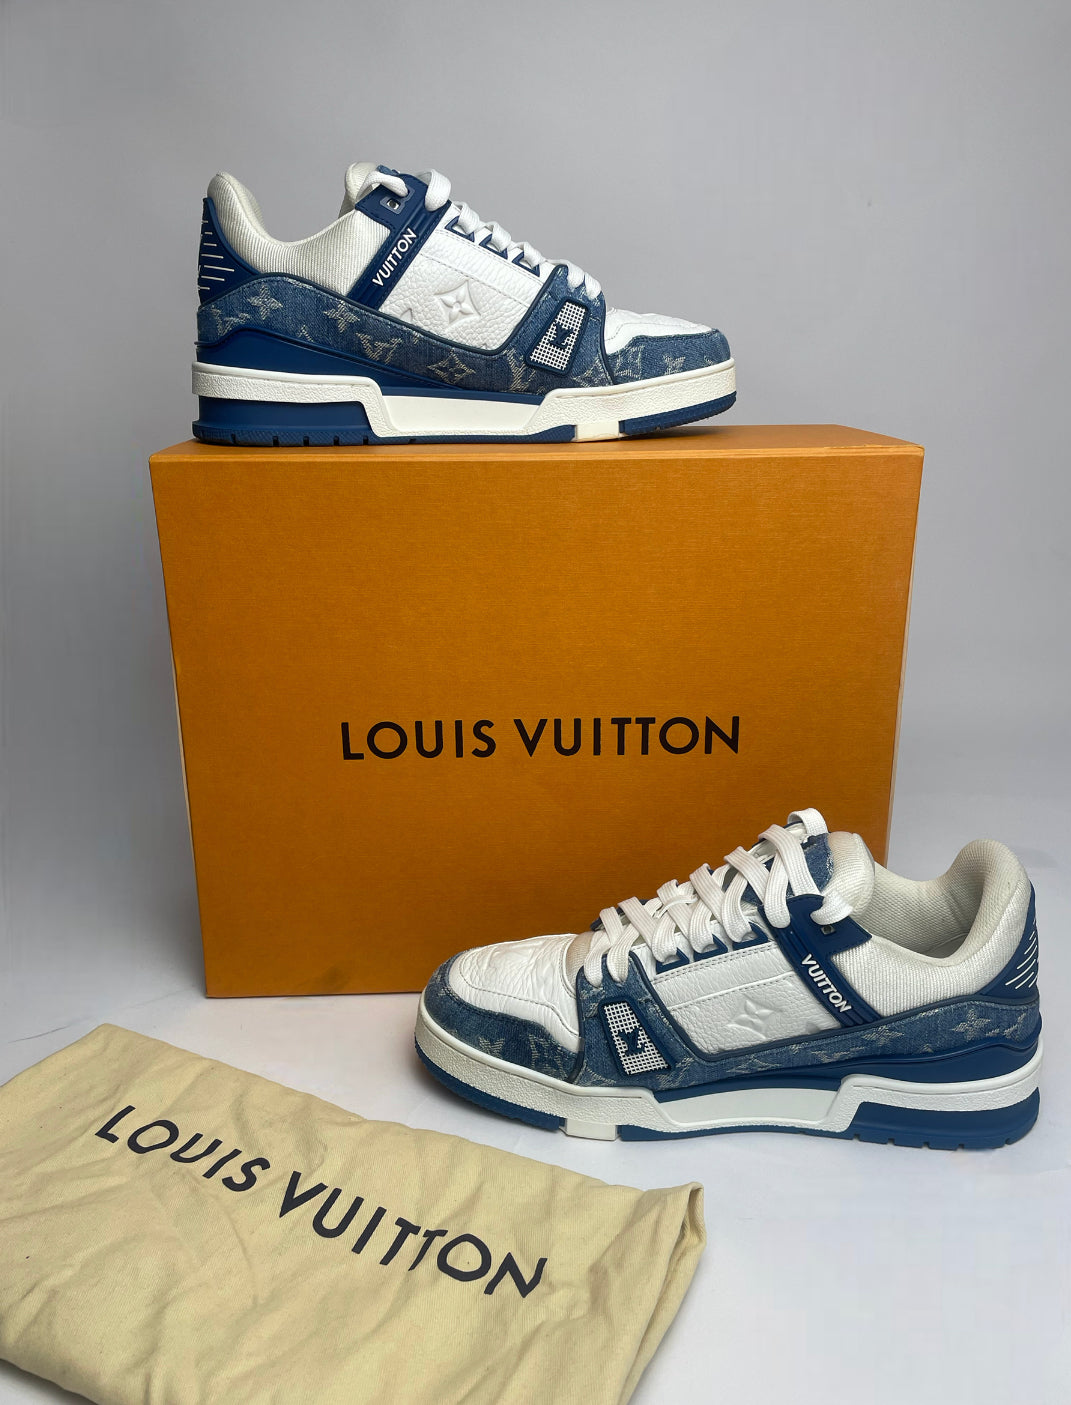 Louis Vuitton Lv Trainer Line Uk6 Silver 1A8Kgm Leather Silver UK 6 Sneakers